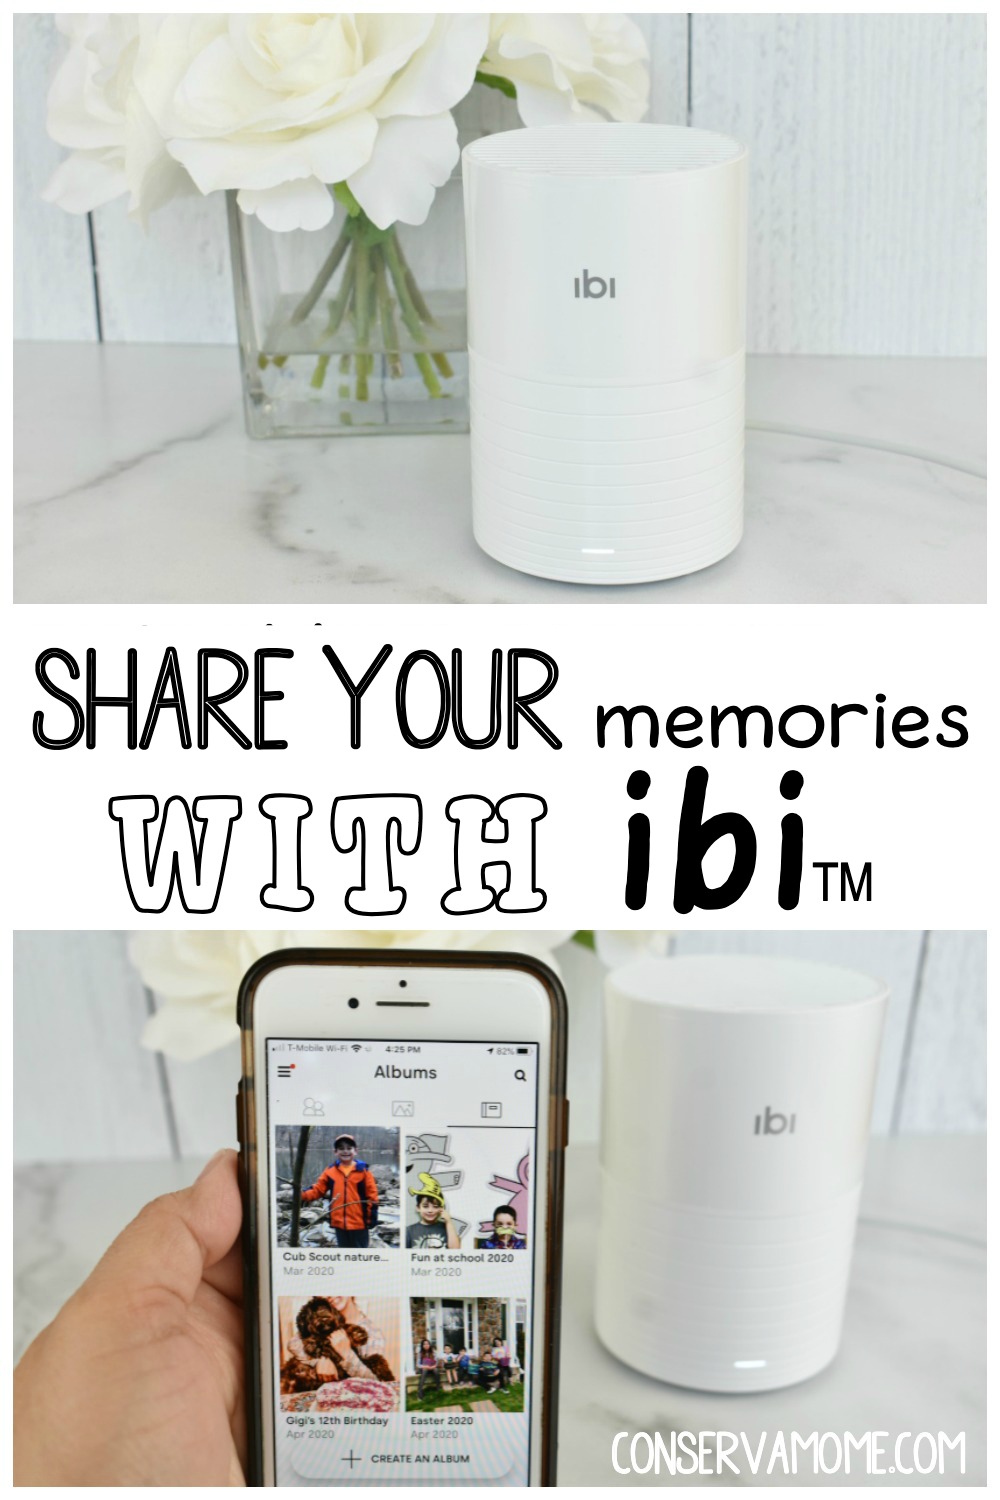 Share your memories